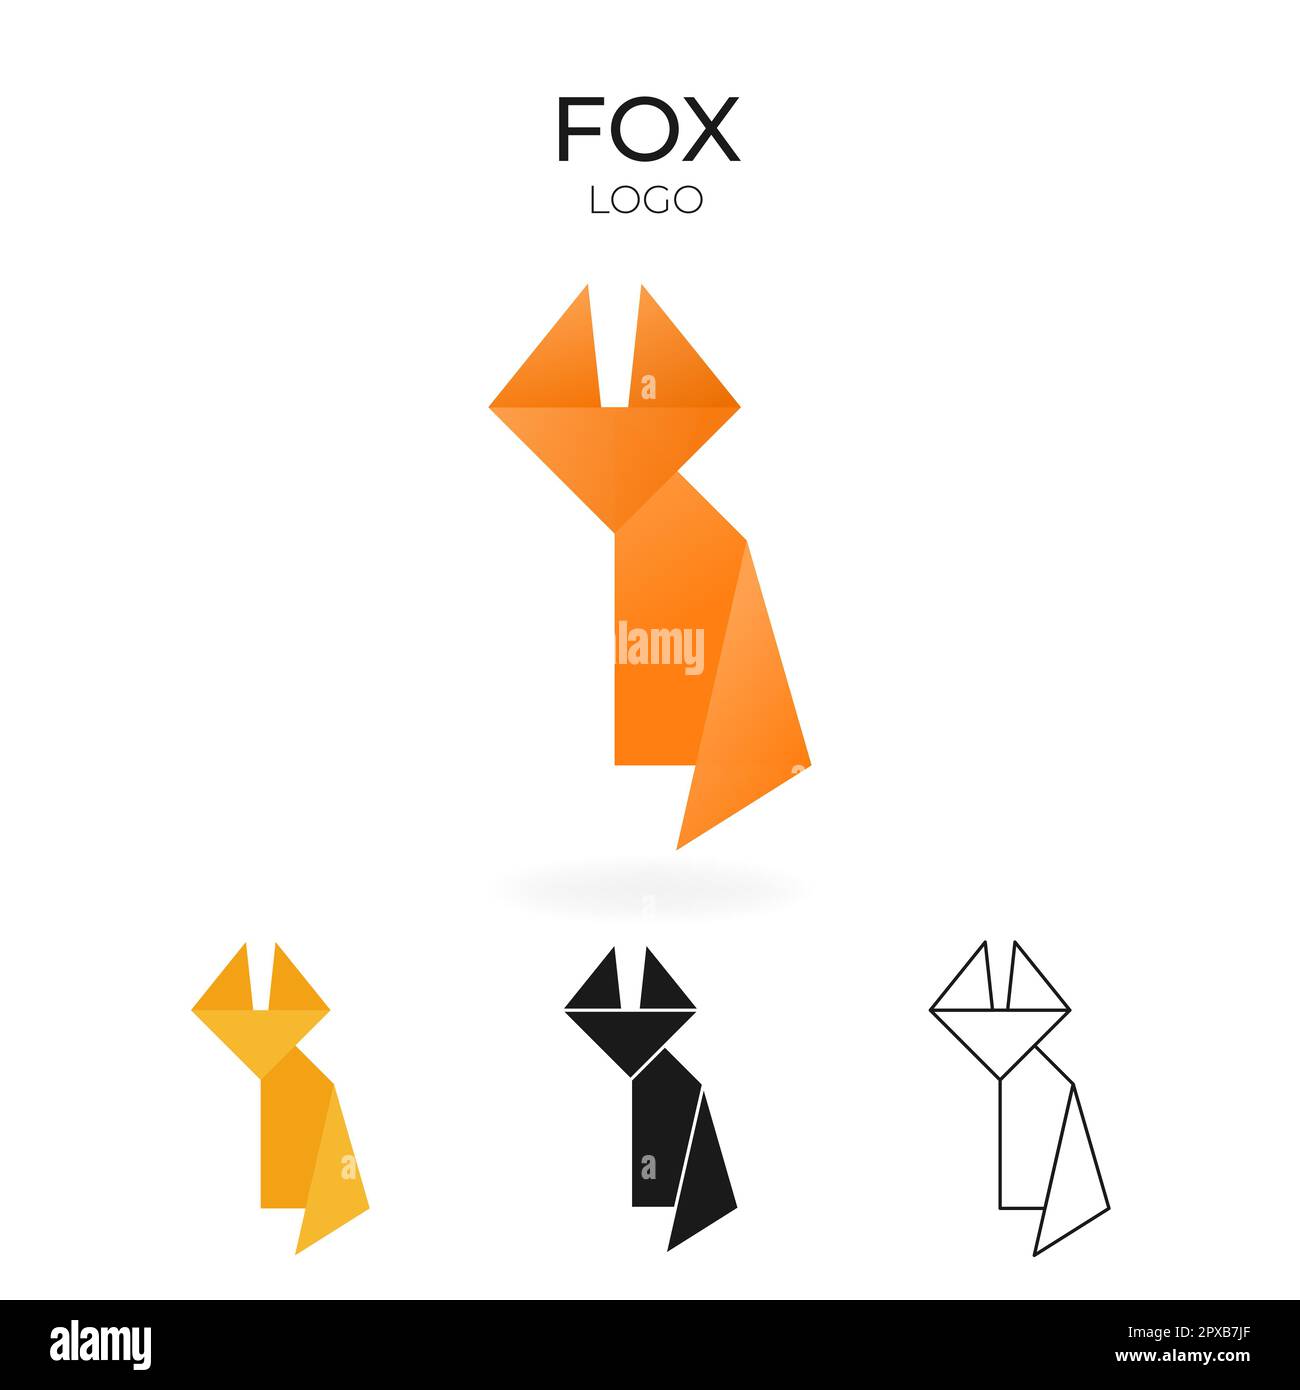 Origami vector logo and icon with fox.  Stock Vector